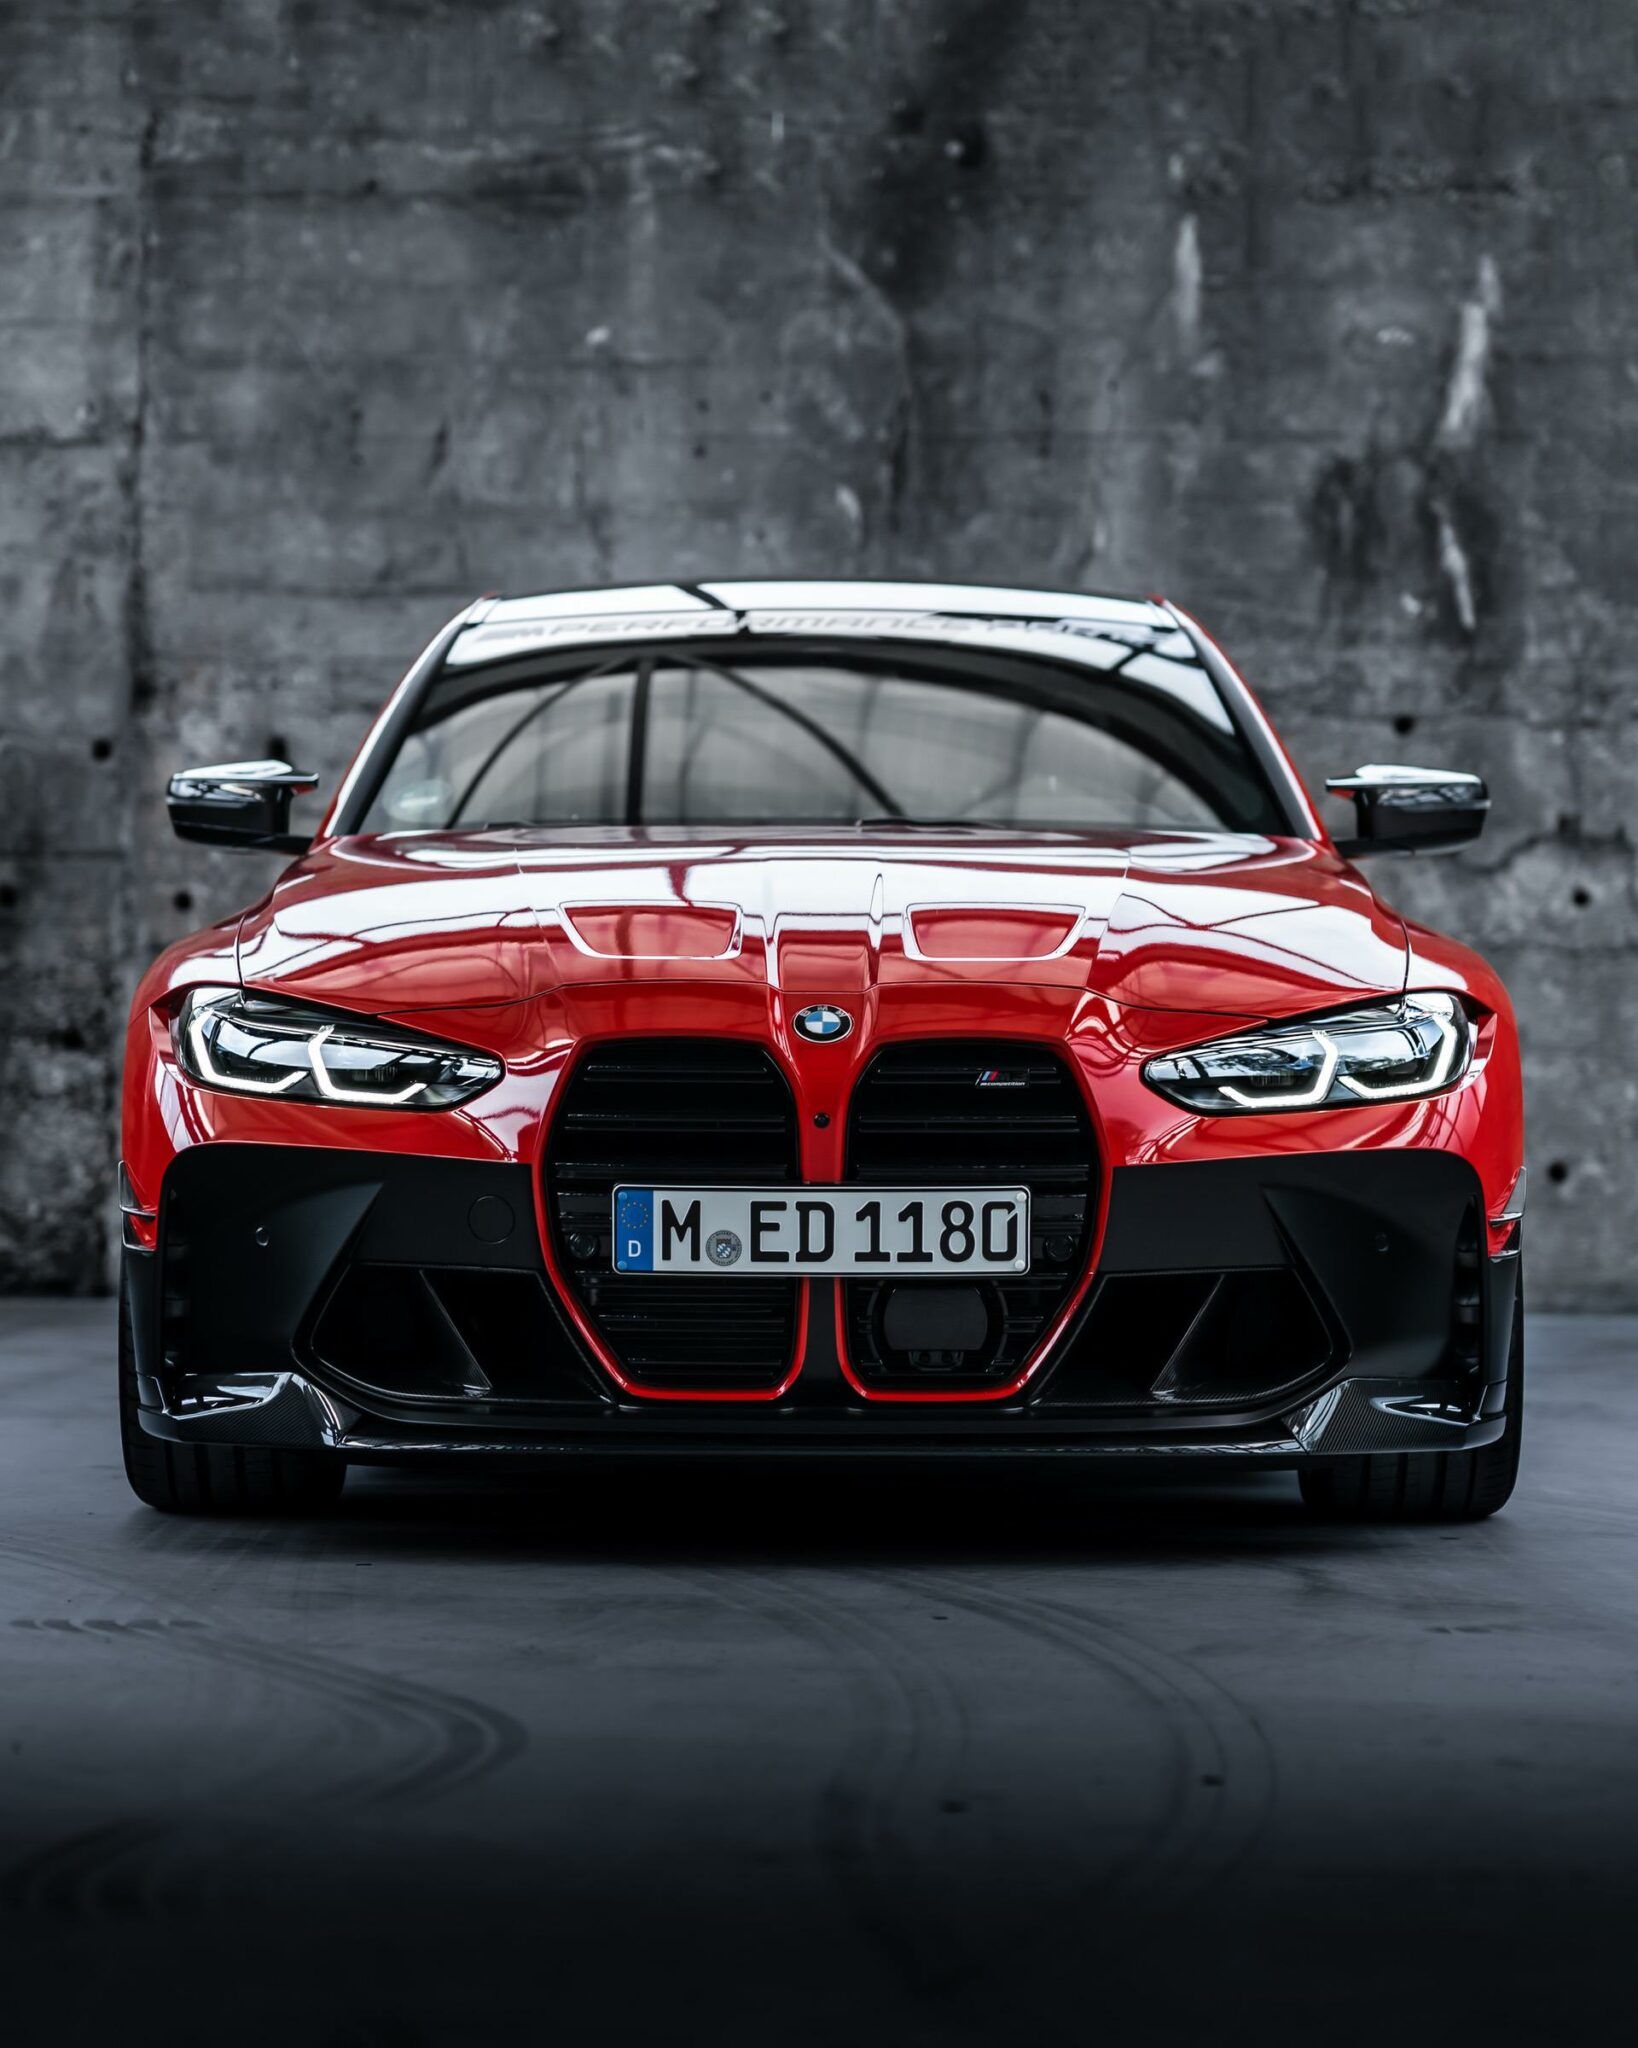 2021 BMW M3 with M Performance Parts A New Photo Gallery Bmw m3